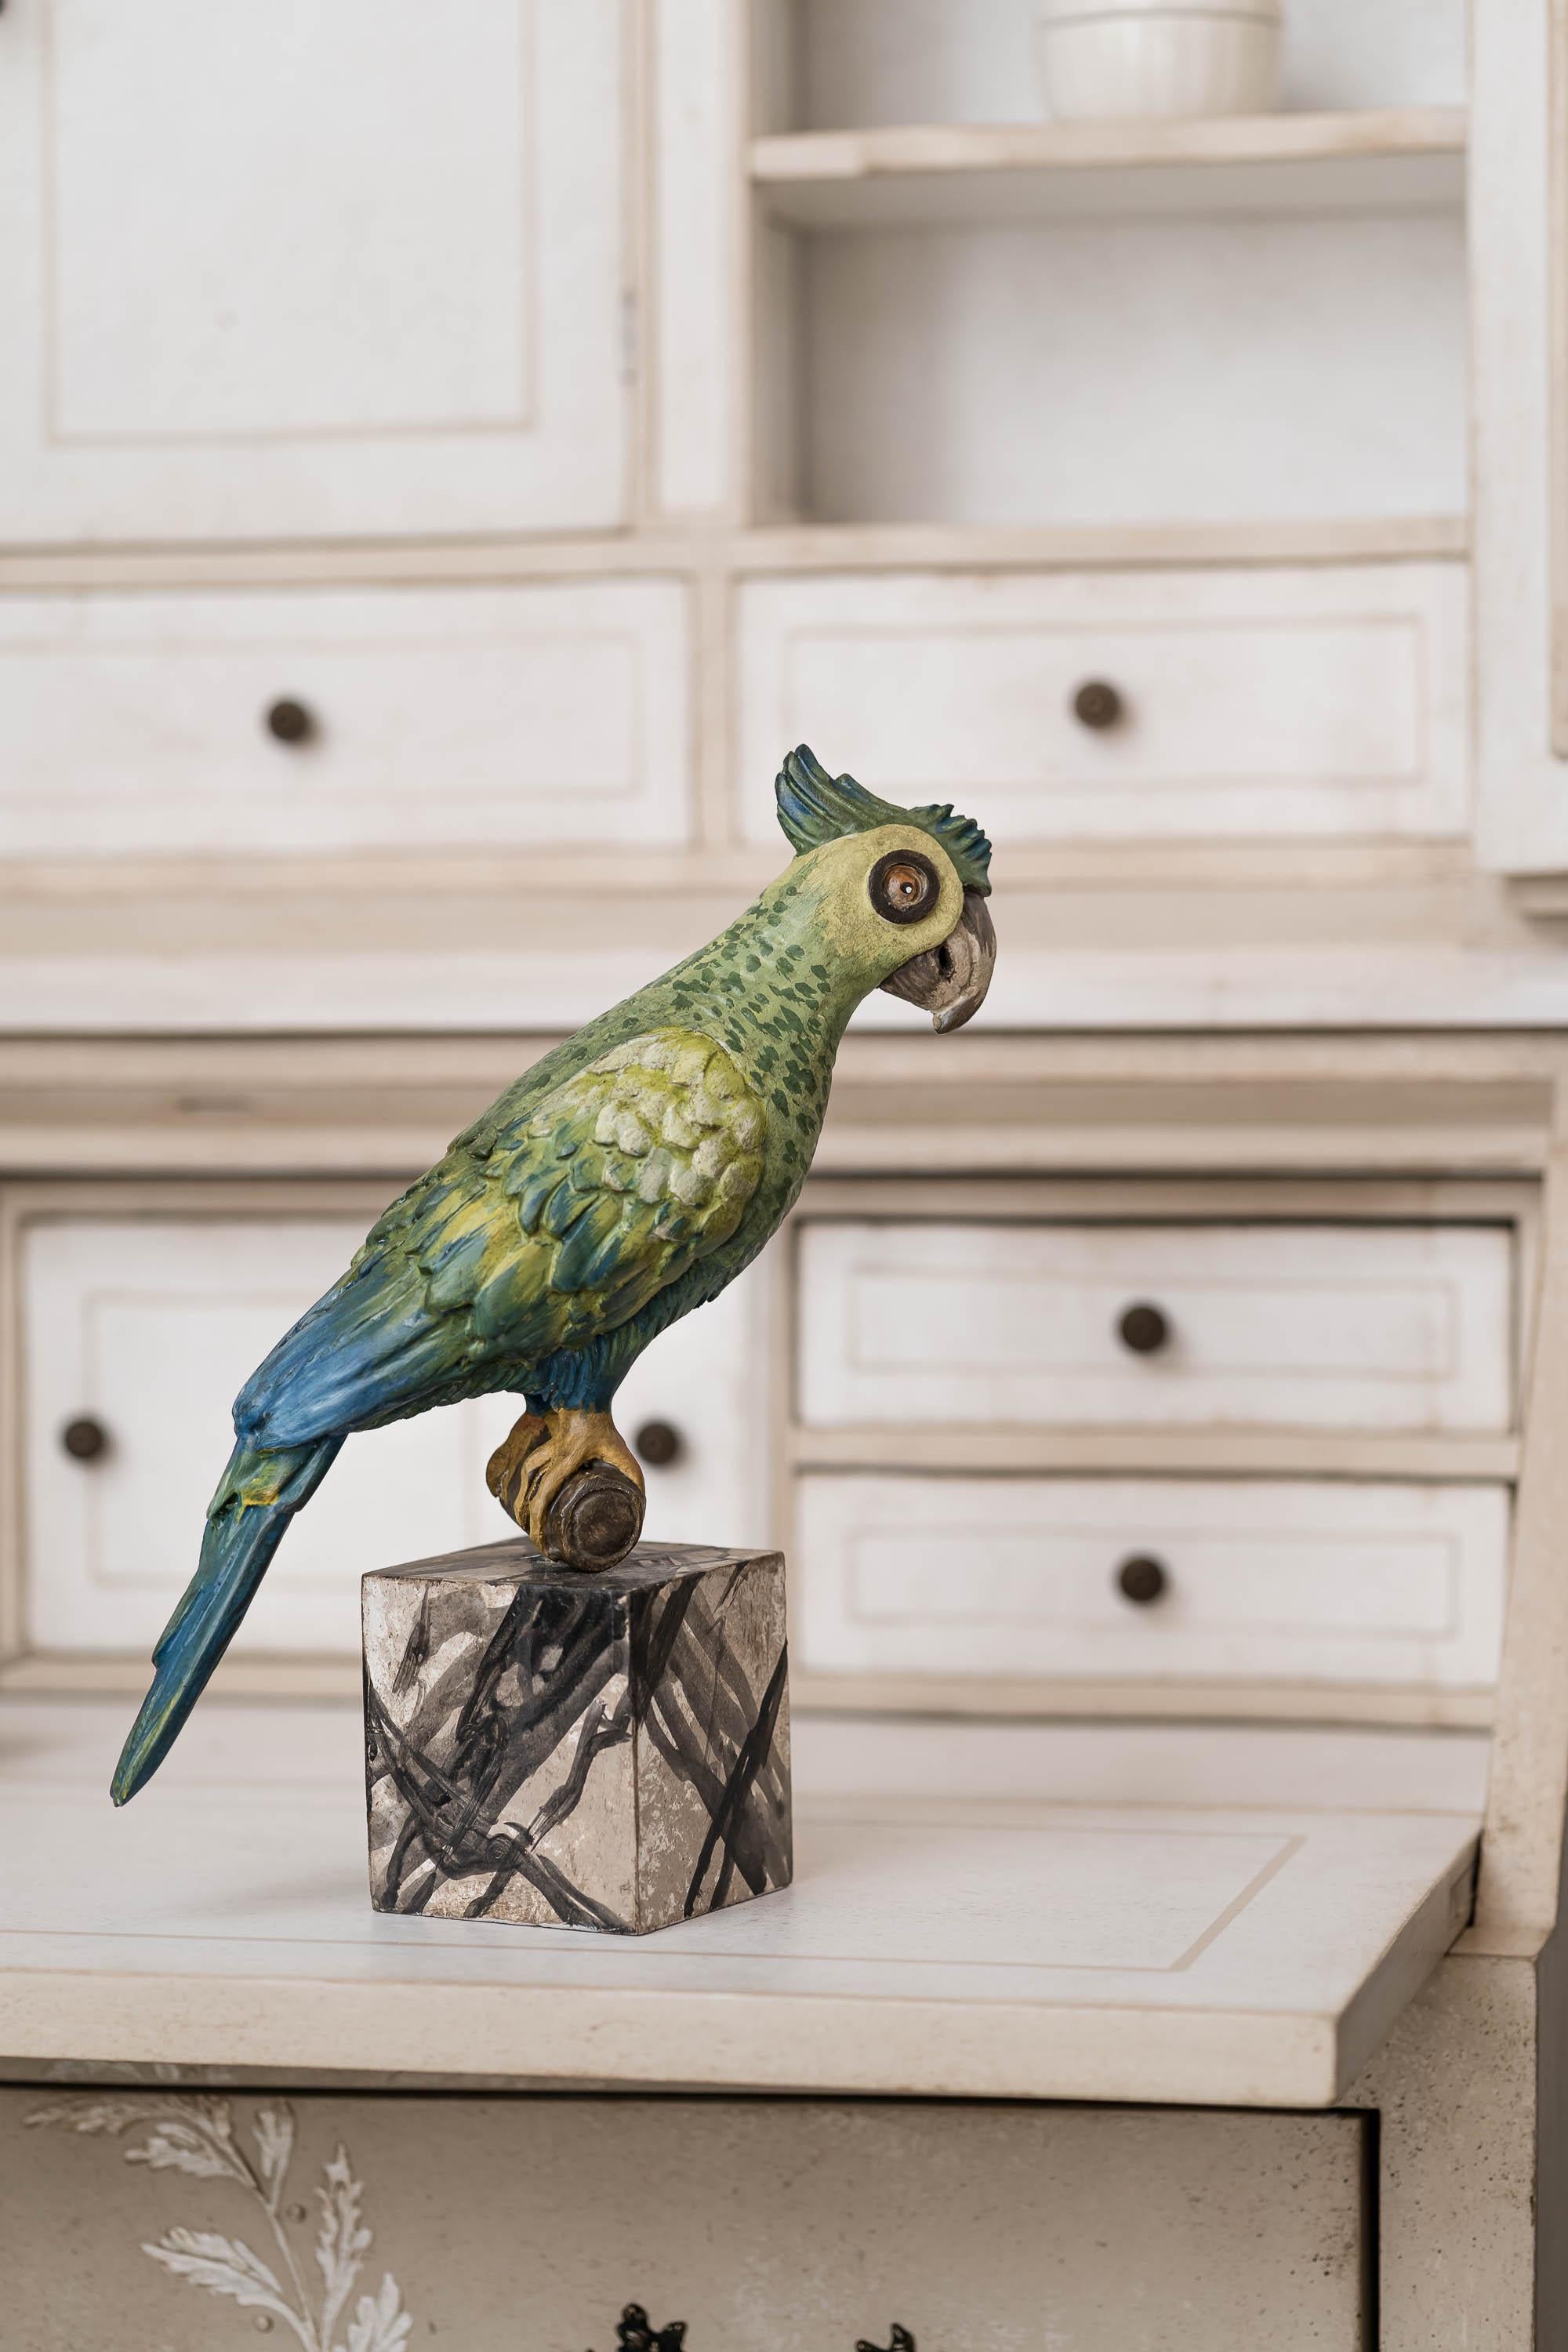 From our Hand-Painted Furniture Collection, we are pleased to introduce you to our decorative Parrot which is part of our category dedicated to accessories and home embellishments.
In case you need a touch of adventure even when not travelling, let